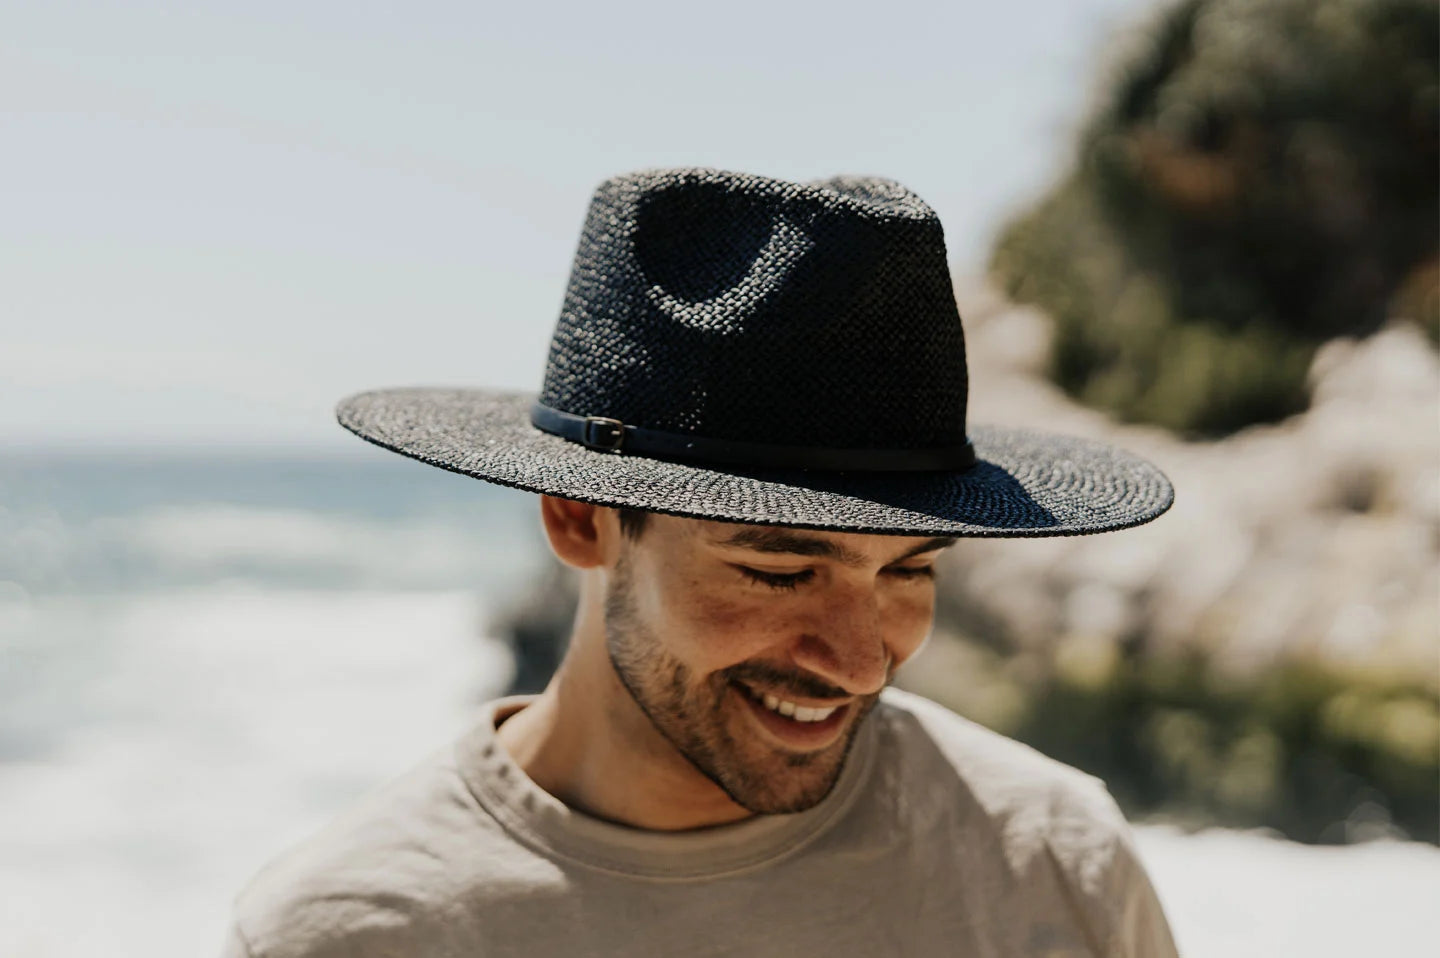 A man on the beach wearing a brown shirt and a black sun hat